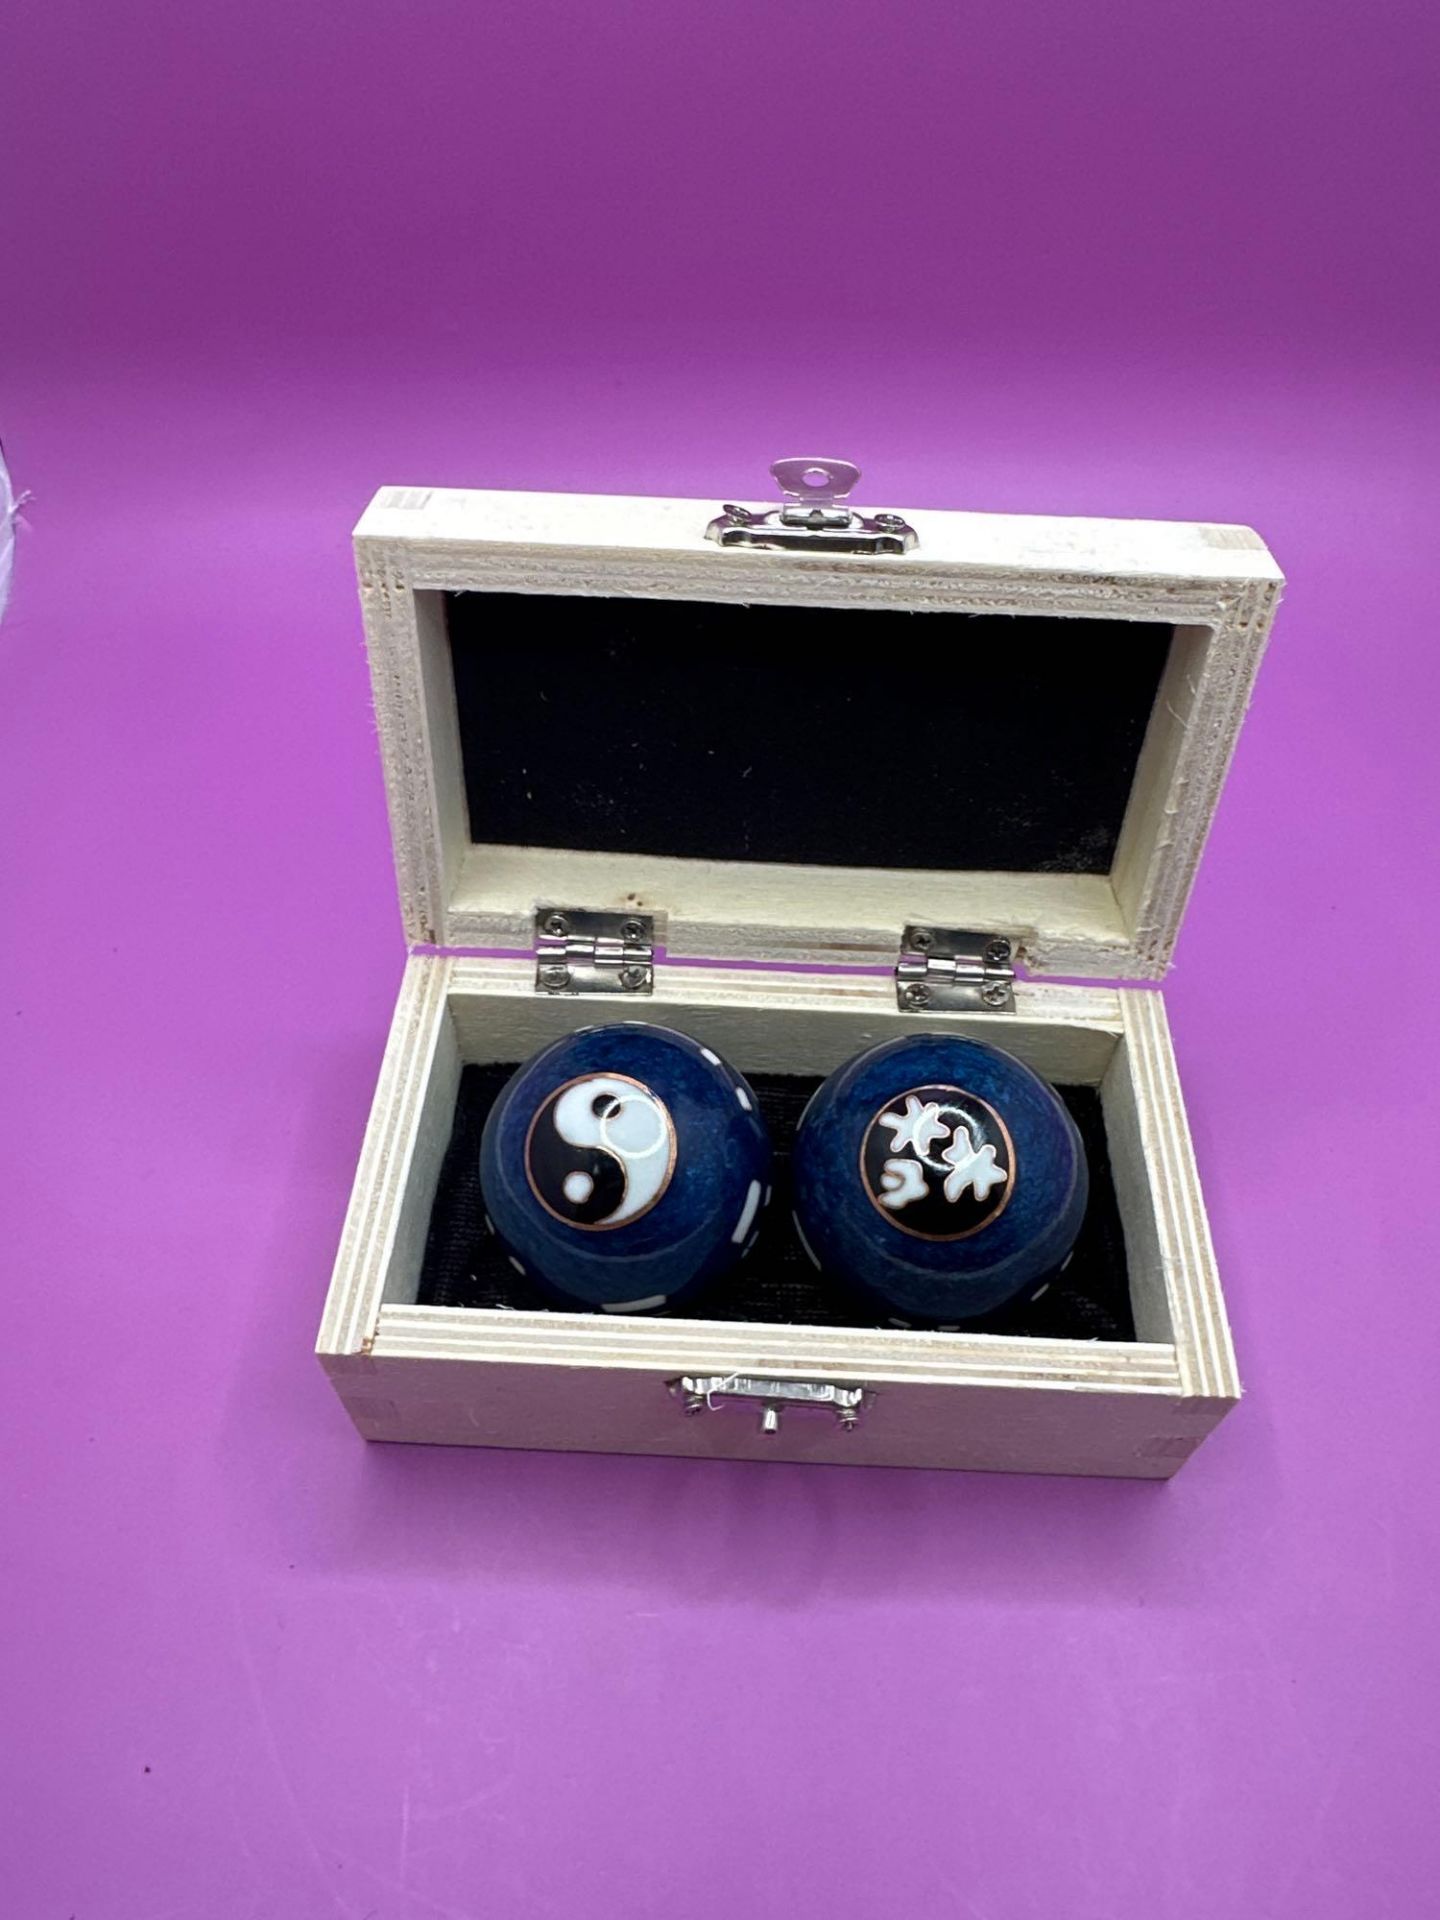 Chiming Harmony Exercise Massage Therapy Balls (Yin Yang) In Wooden Box - Image 4 of 4